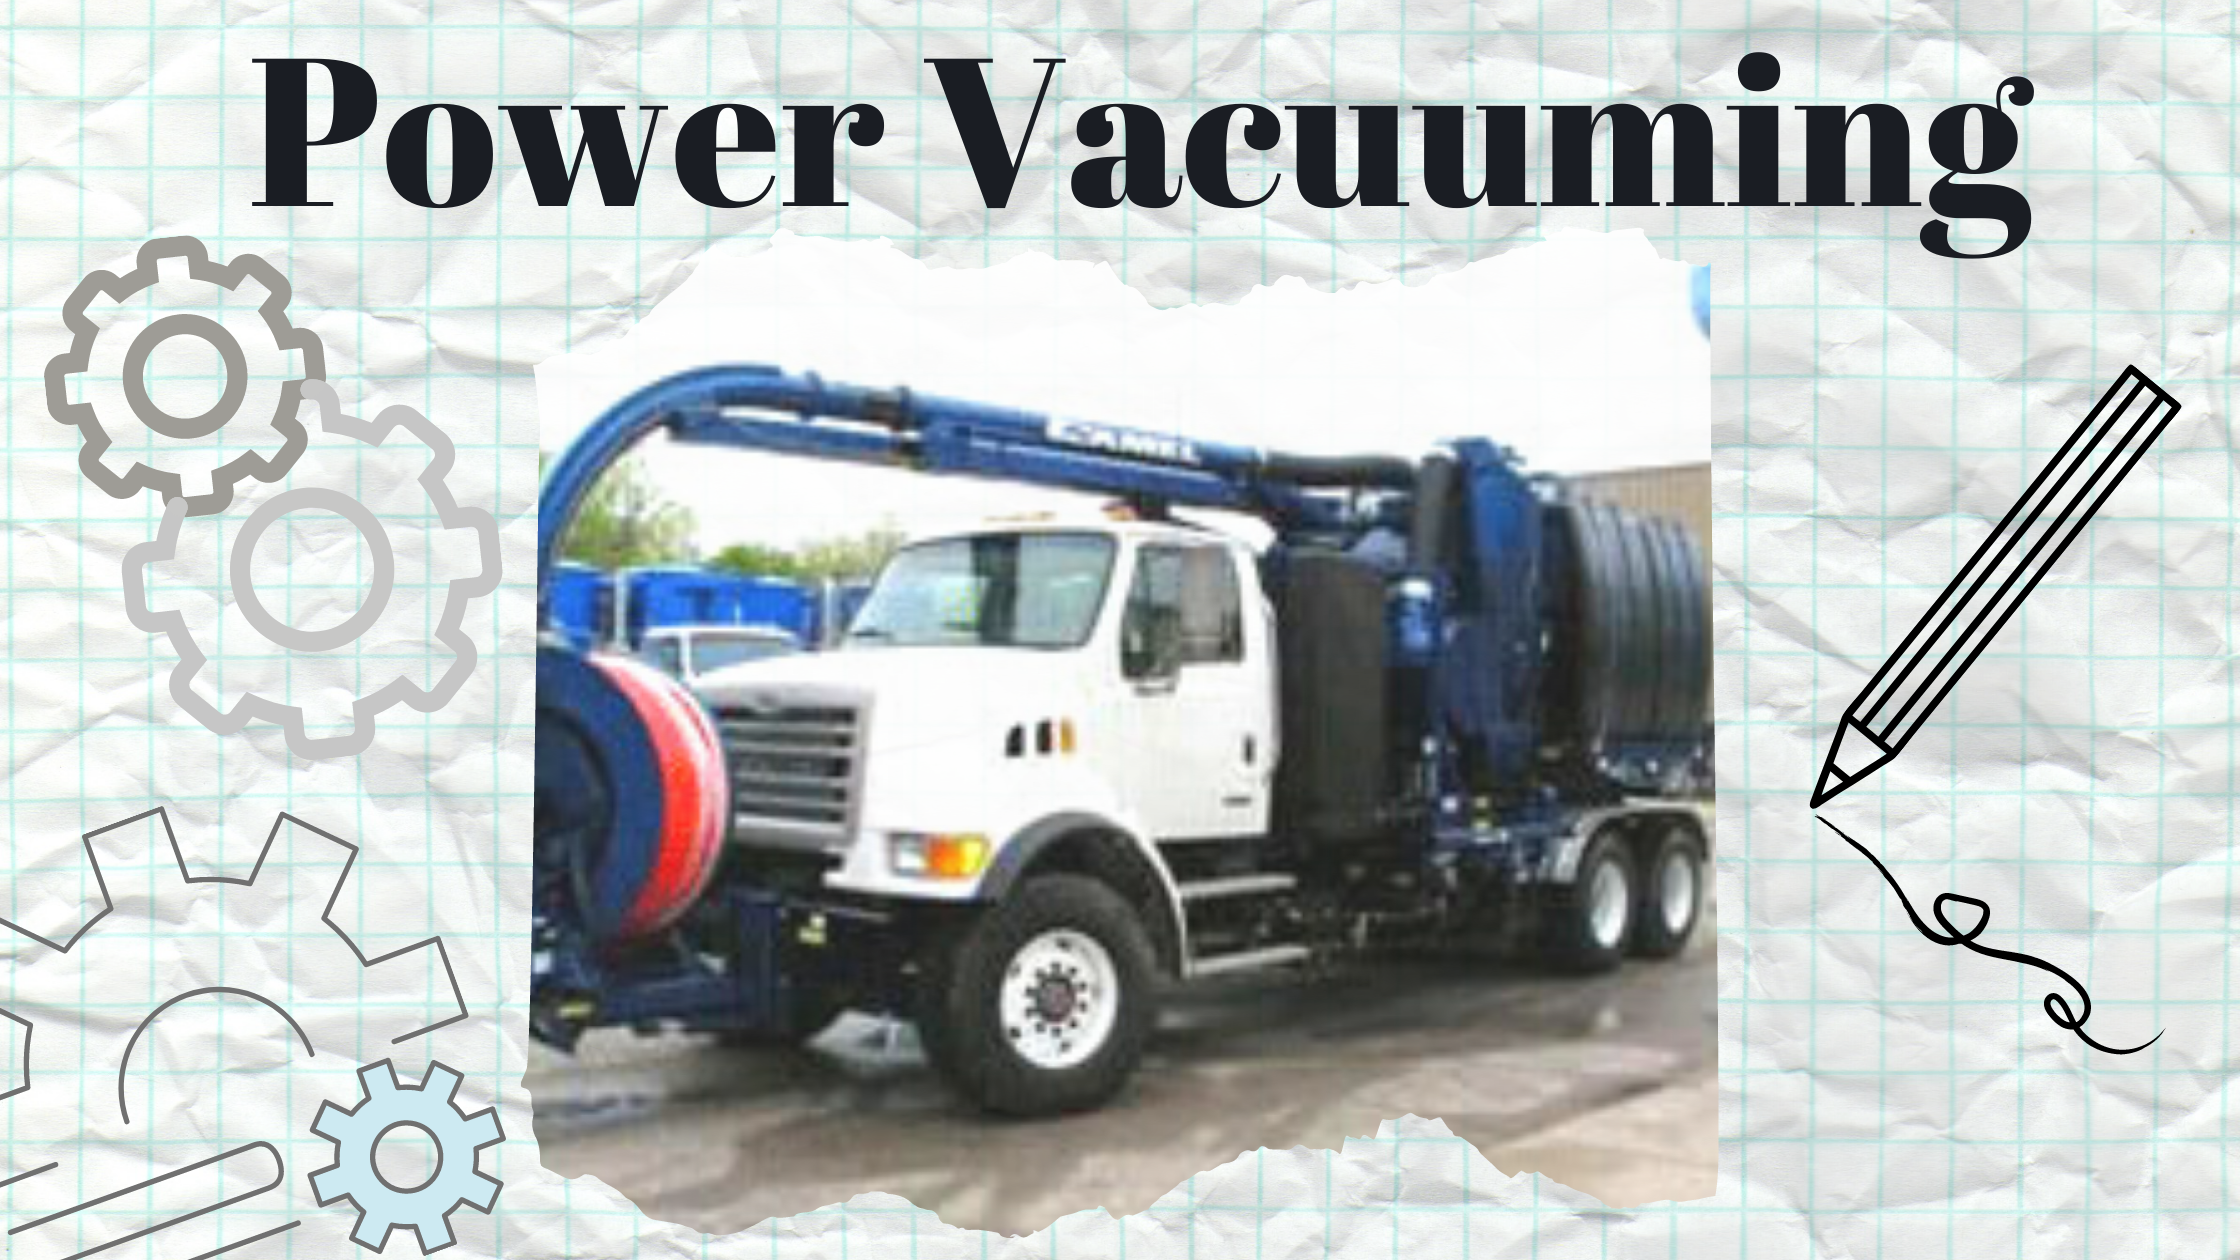 An image of a vacuum truck.